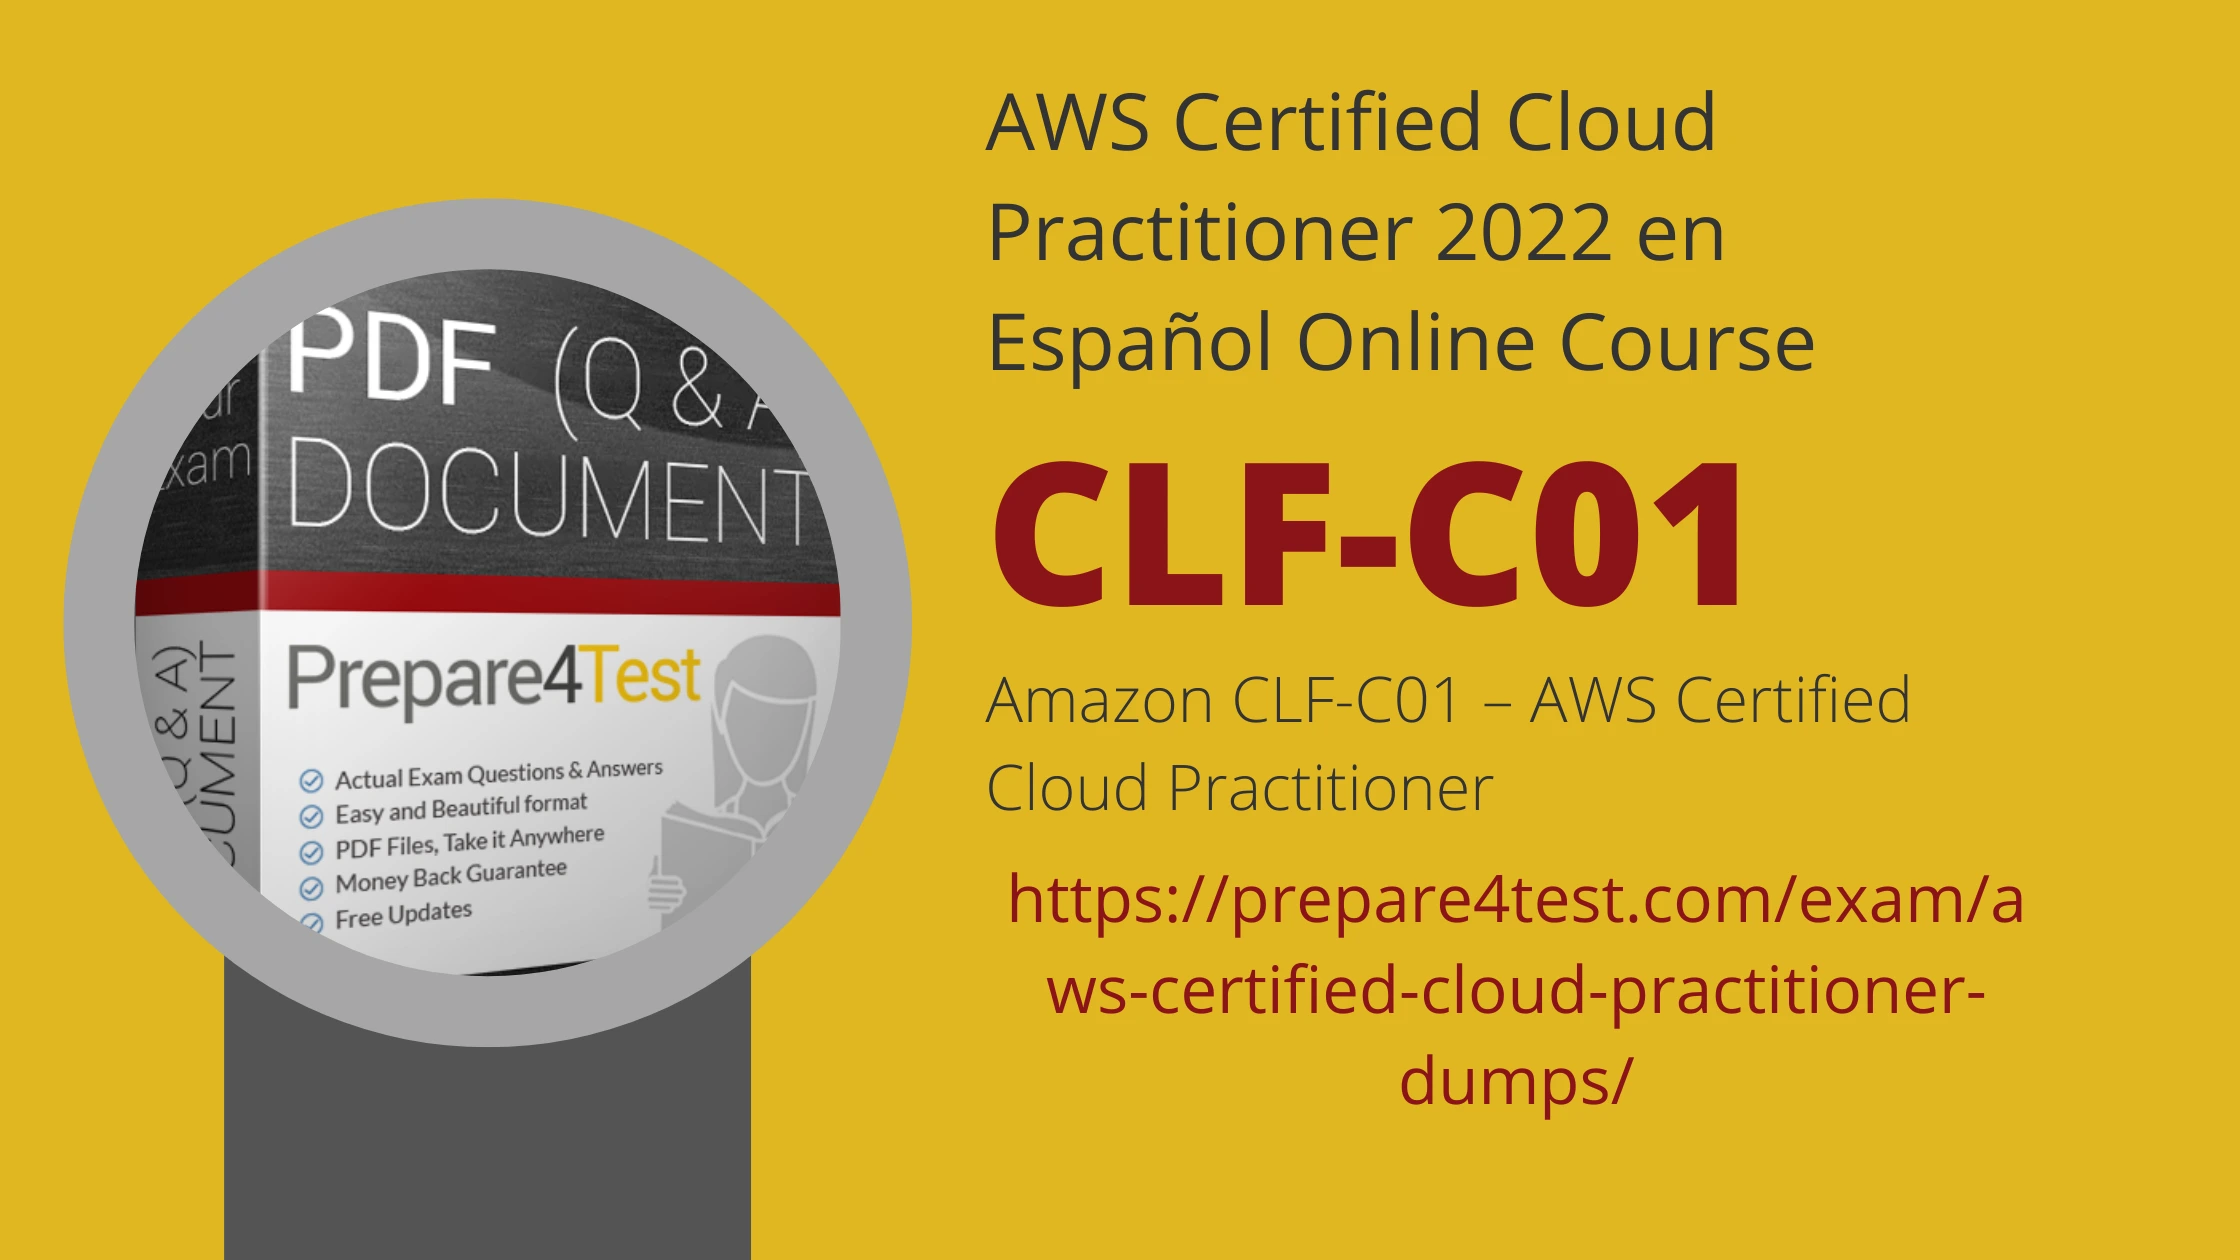 AWS Certified Cloud Practitioner 2022 en Español Online Course promo codes and guides